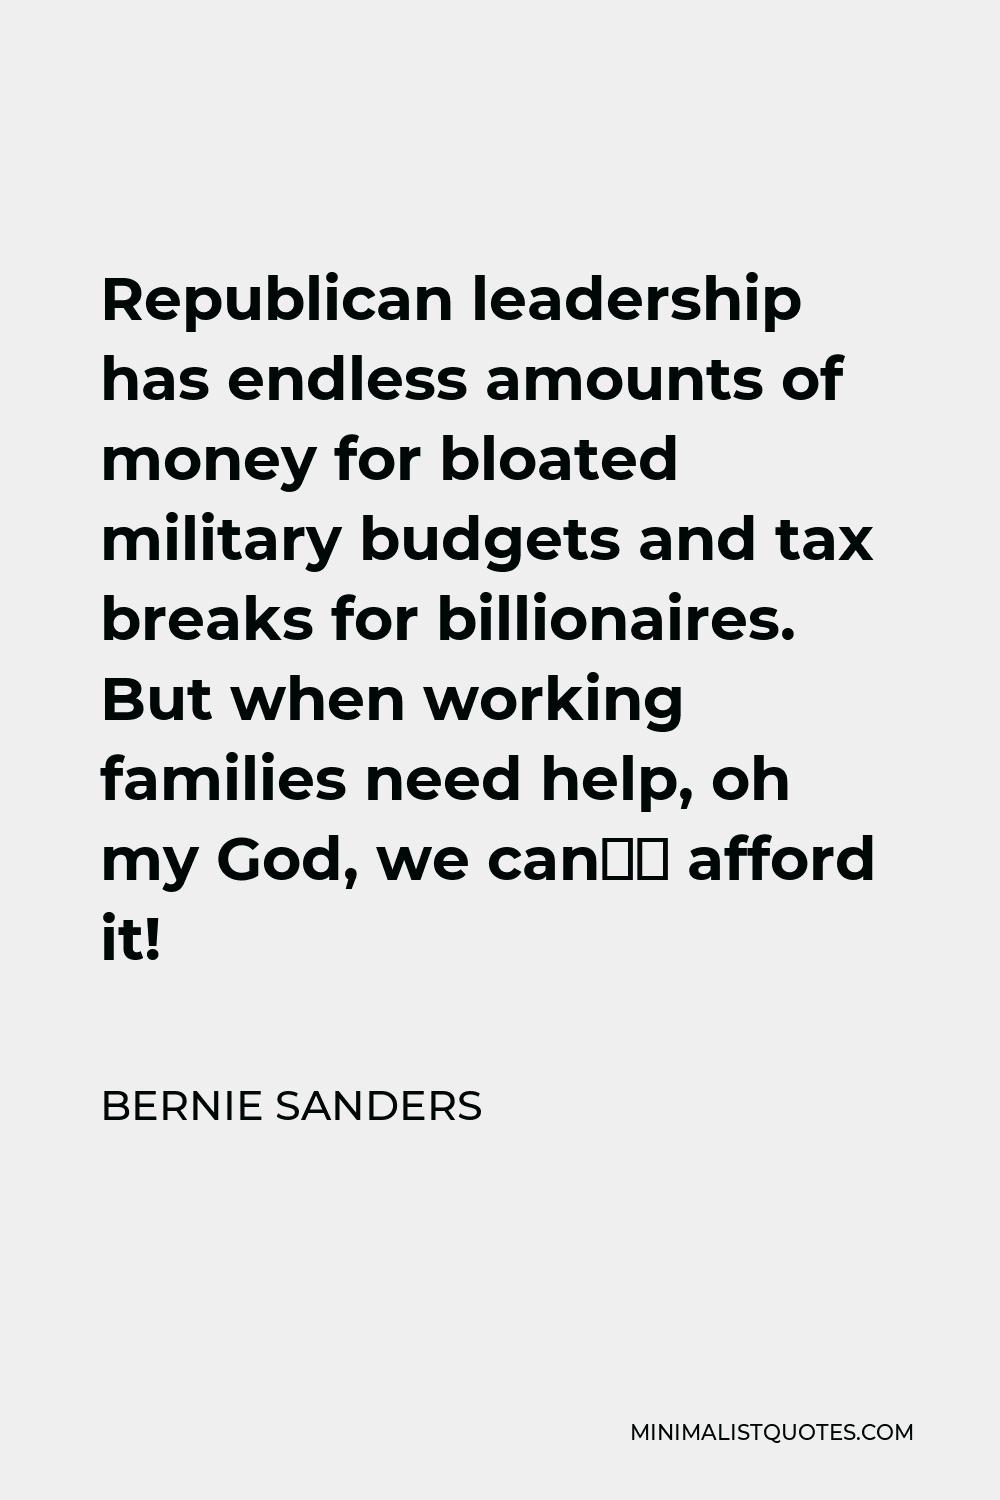 Bernie Sanders Quote - Republican leadership has endless amounts of money for bloated military budgets and tax breaks for billionaires. But when working families need help, oh my God, we can’t afford it!